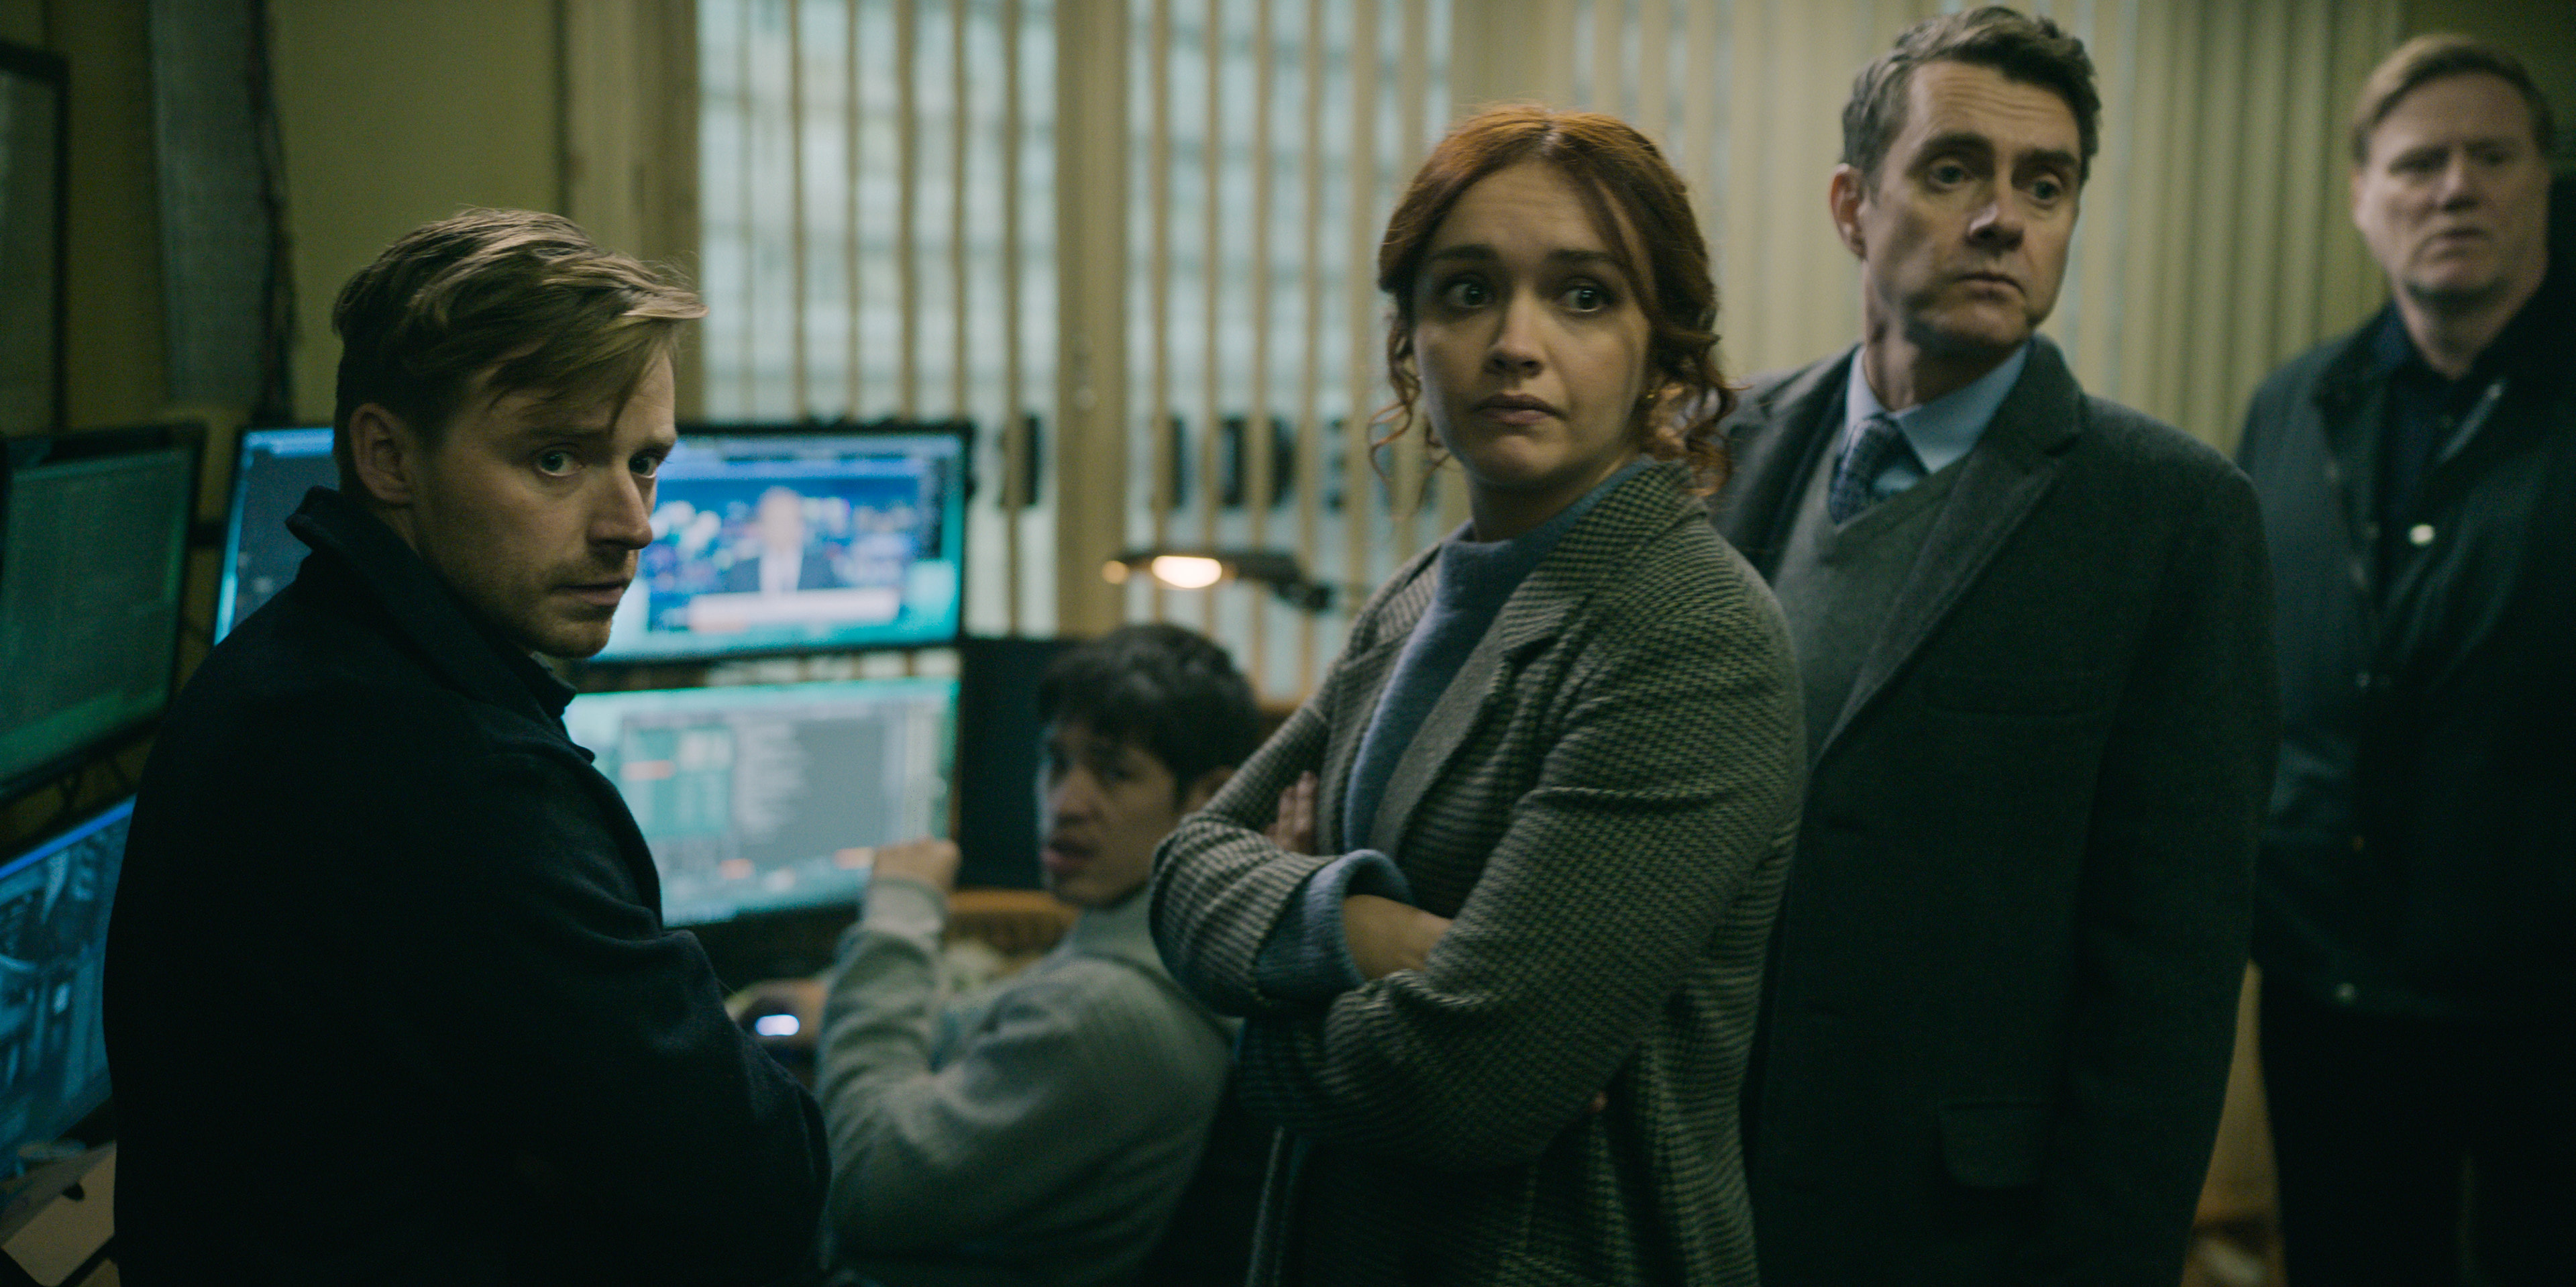 Jack Lowden, Christopher Chung, Olivia Cooke and Paul Higgins in an episode of 'Slow Horses' on Apple TV+. They're gathered around a computer and looking at someone facing away from it.